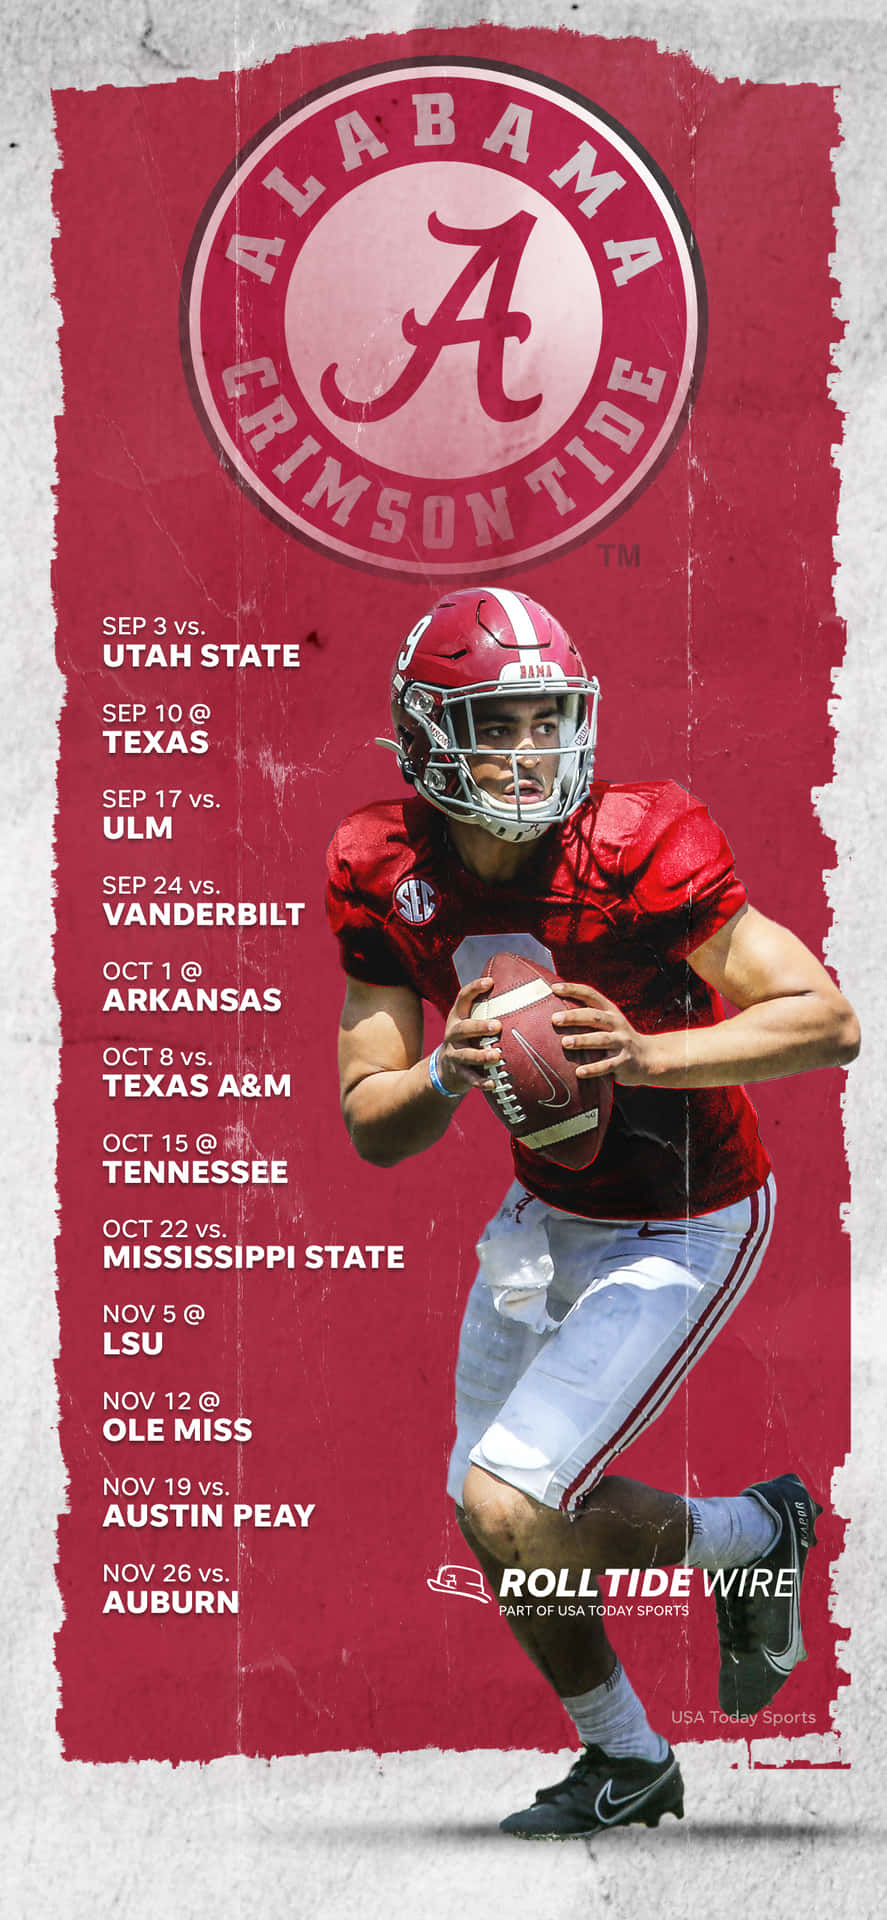 Game Day Ready With An Alabama Football iPhone Wallpaper